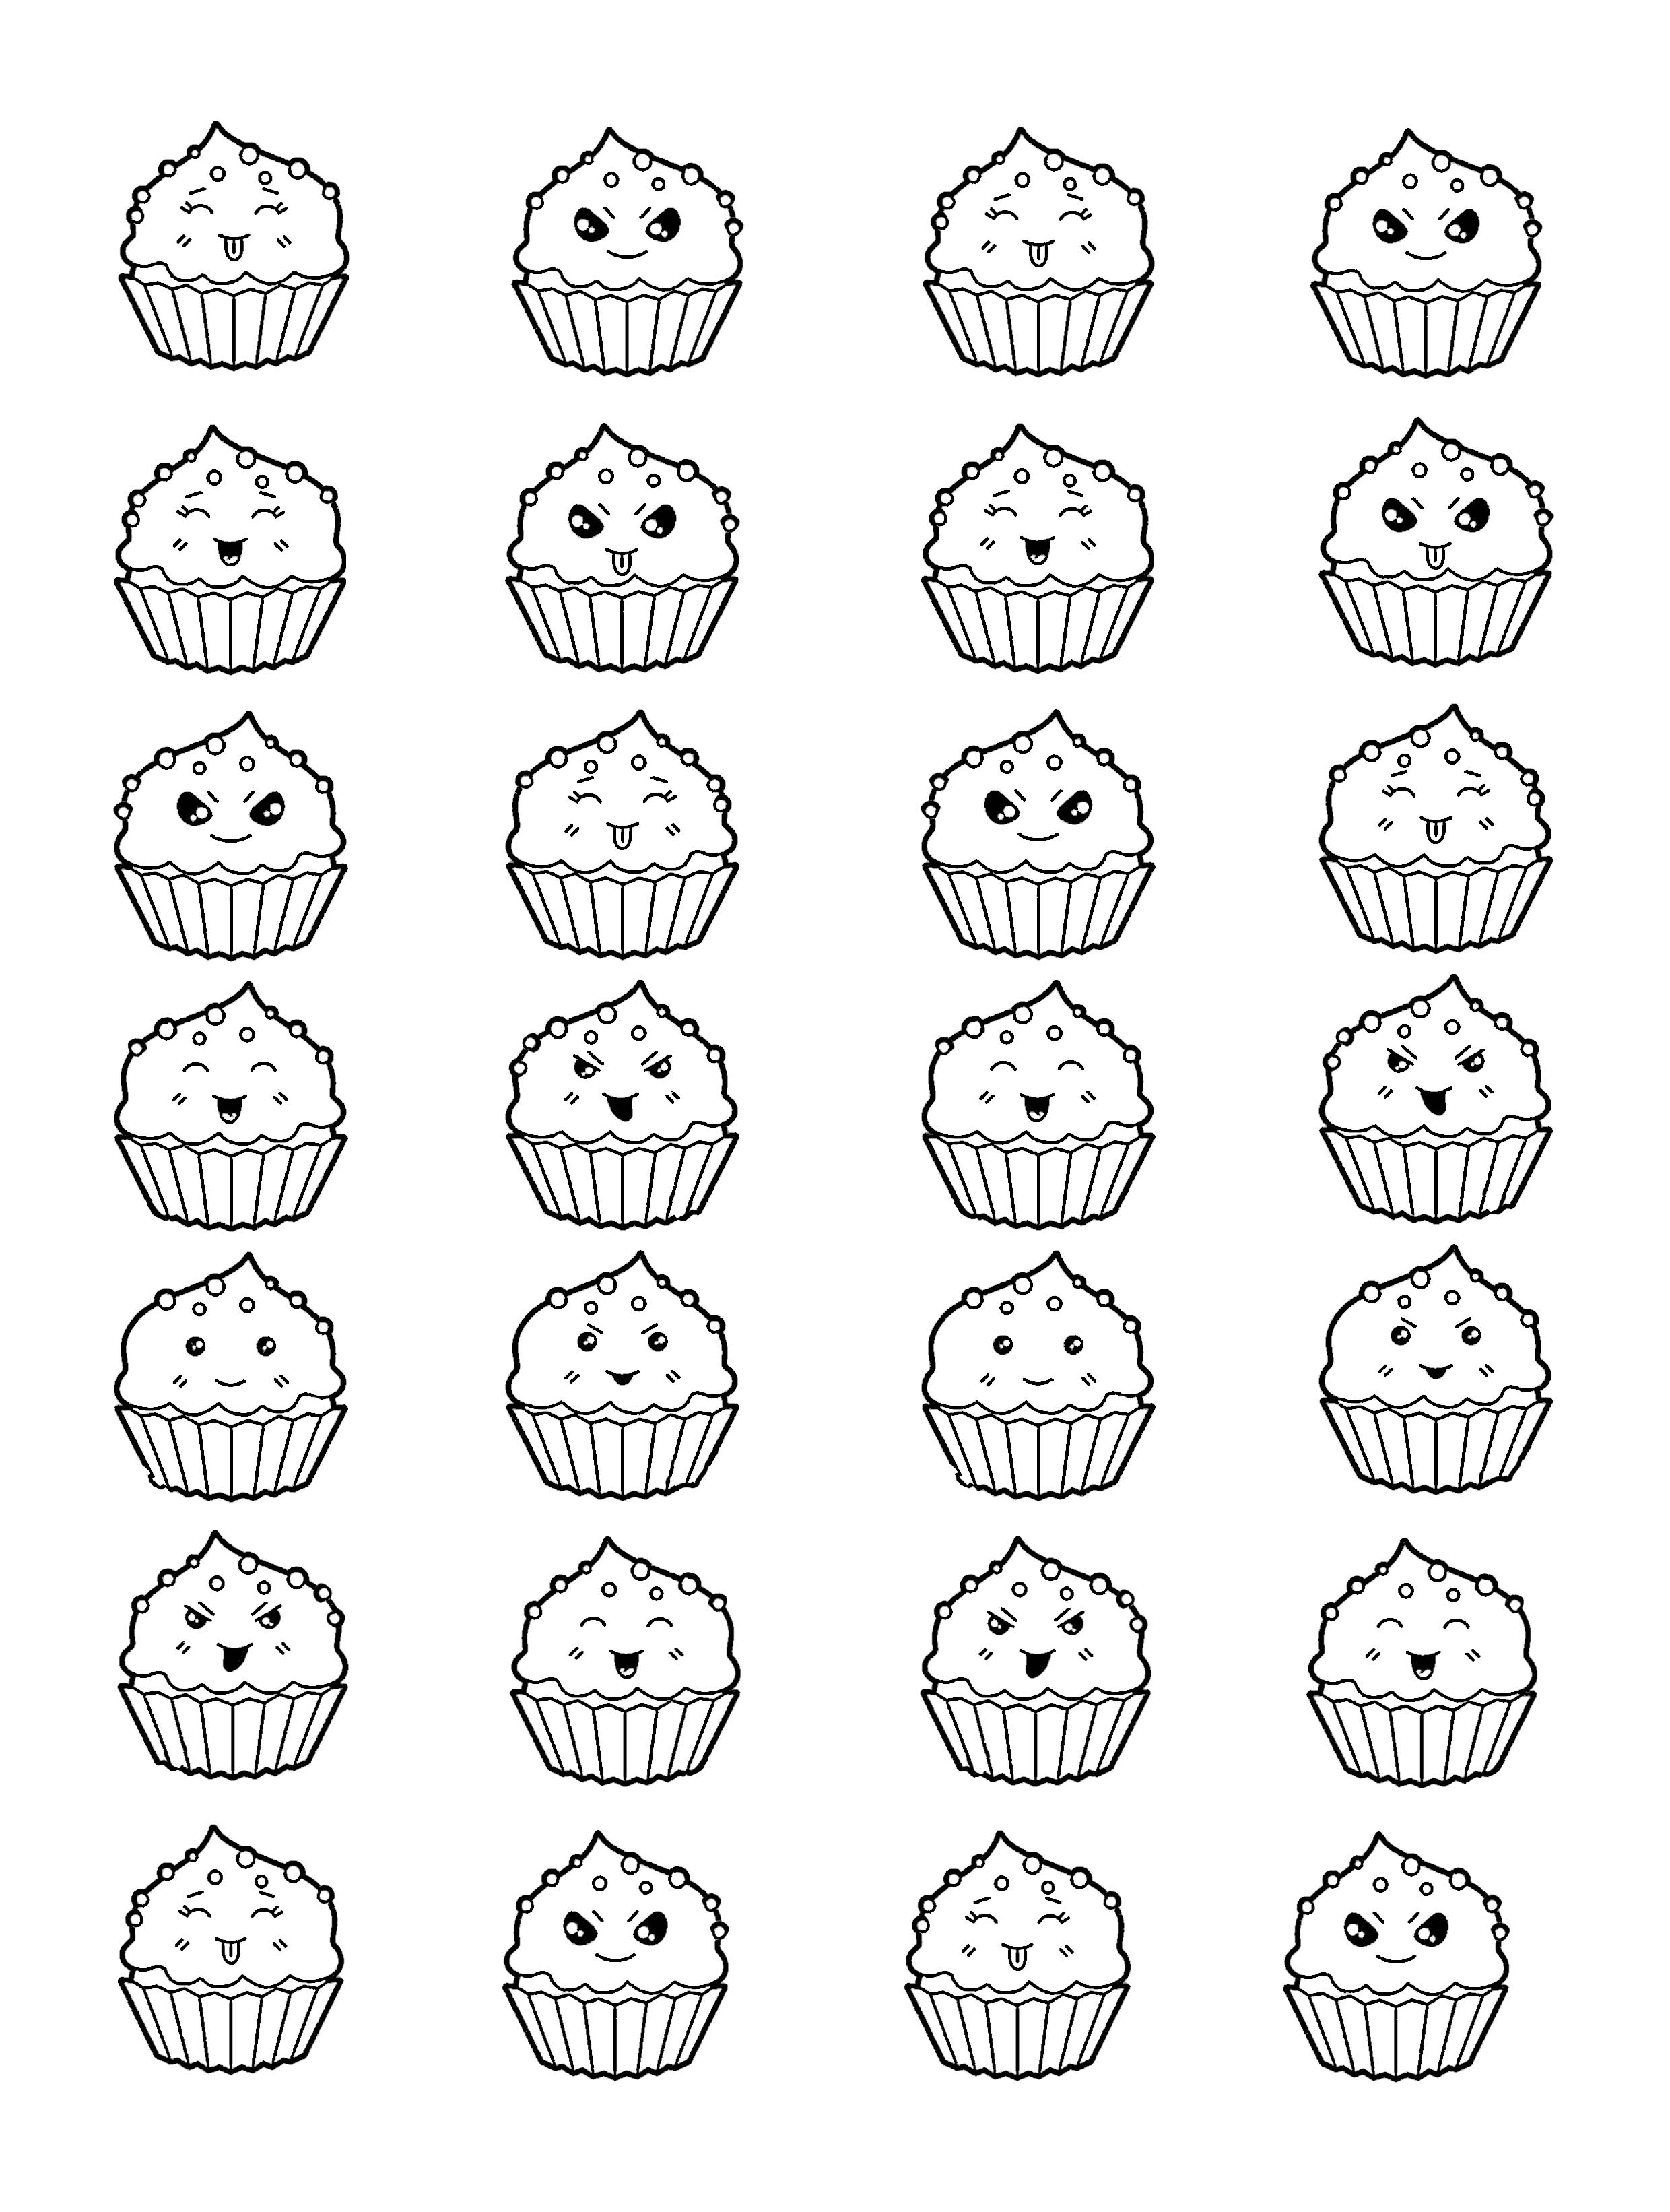 Kawai cup cakes - Cupcakes Adult Coloring Pages